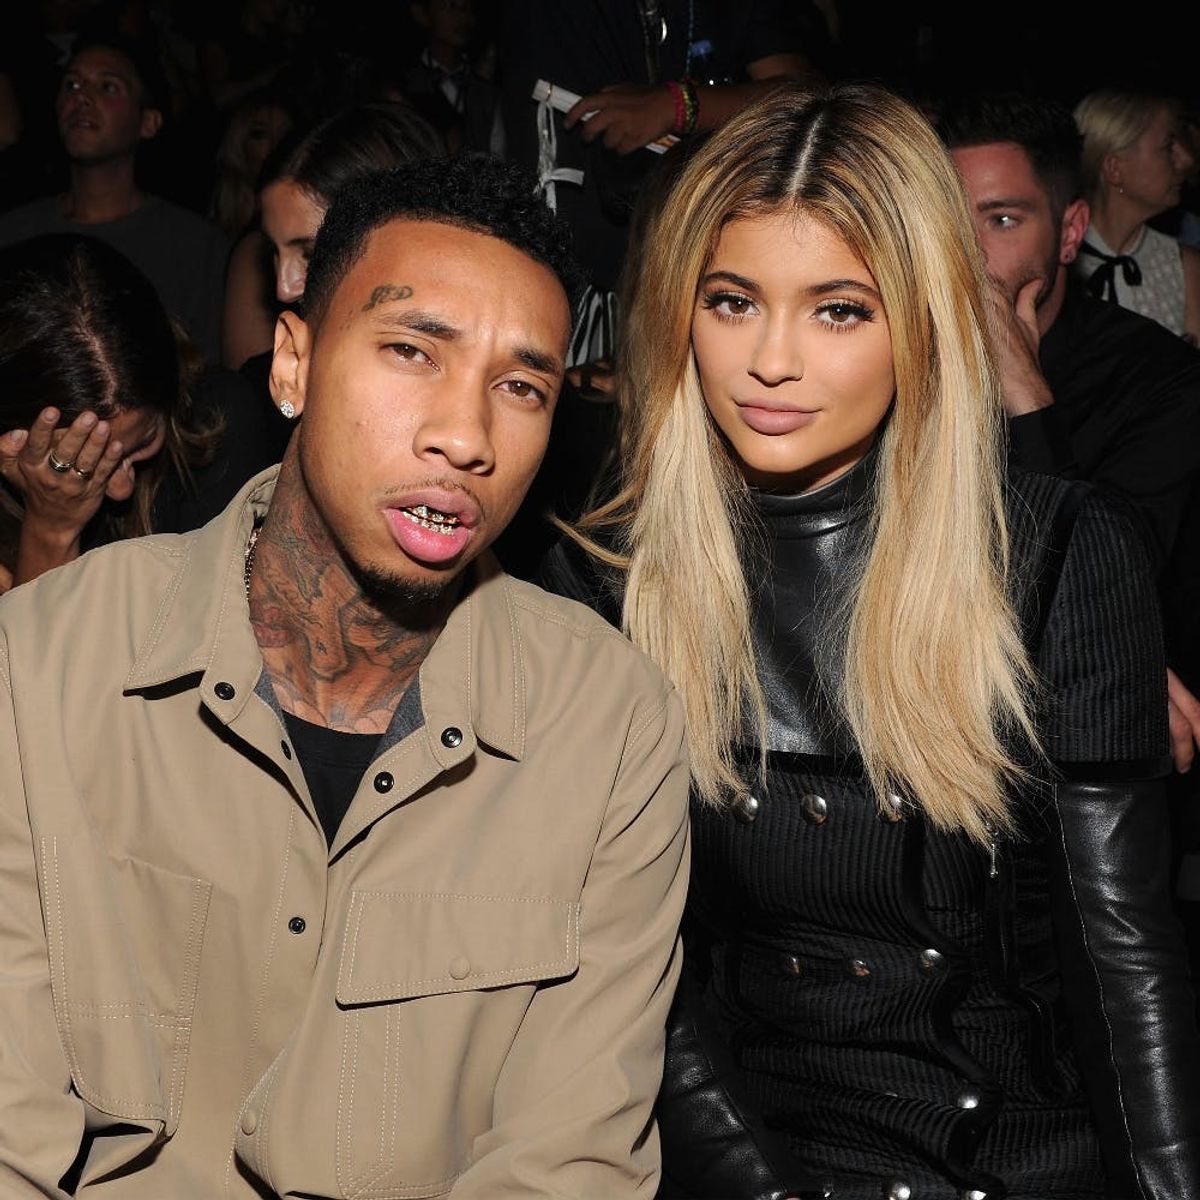 New Information About Kylie Jenner + Tyga’s Relationship Just Gives Us More Questions